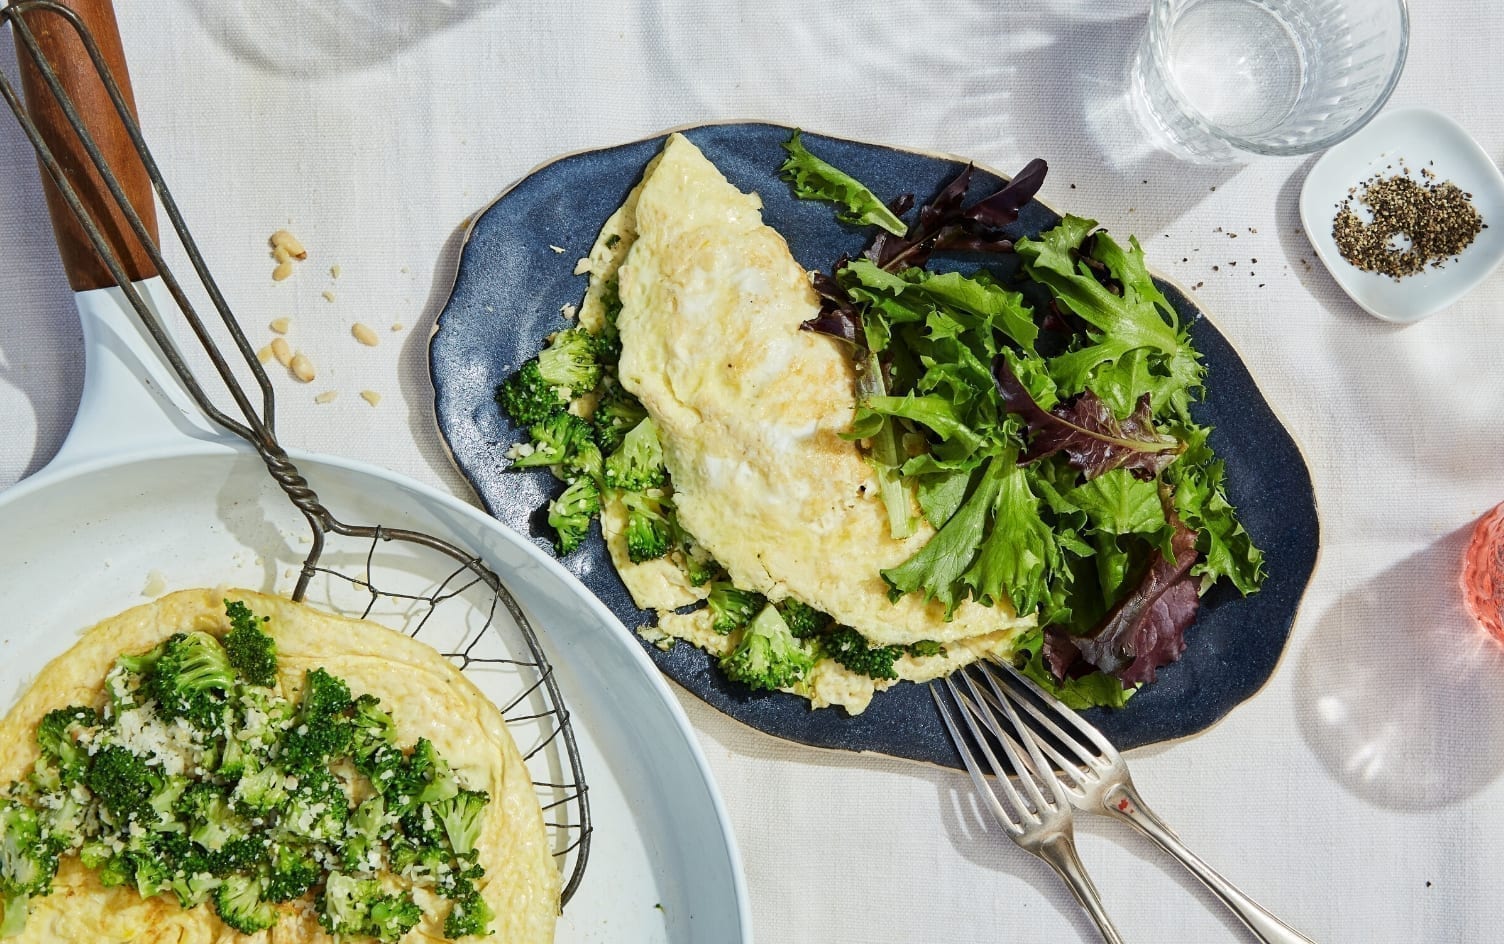 Broccoli Pesto Omelet With Mixed Greens